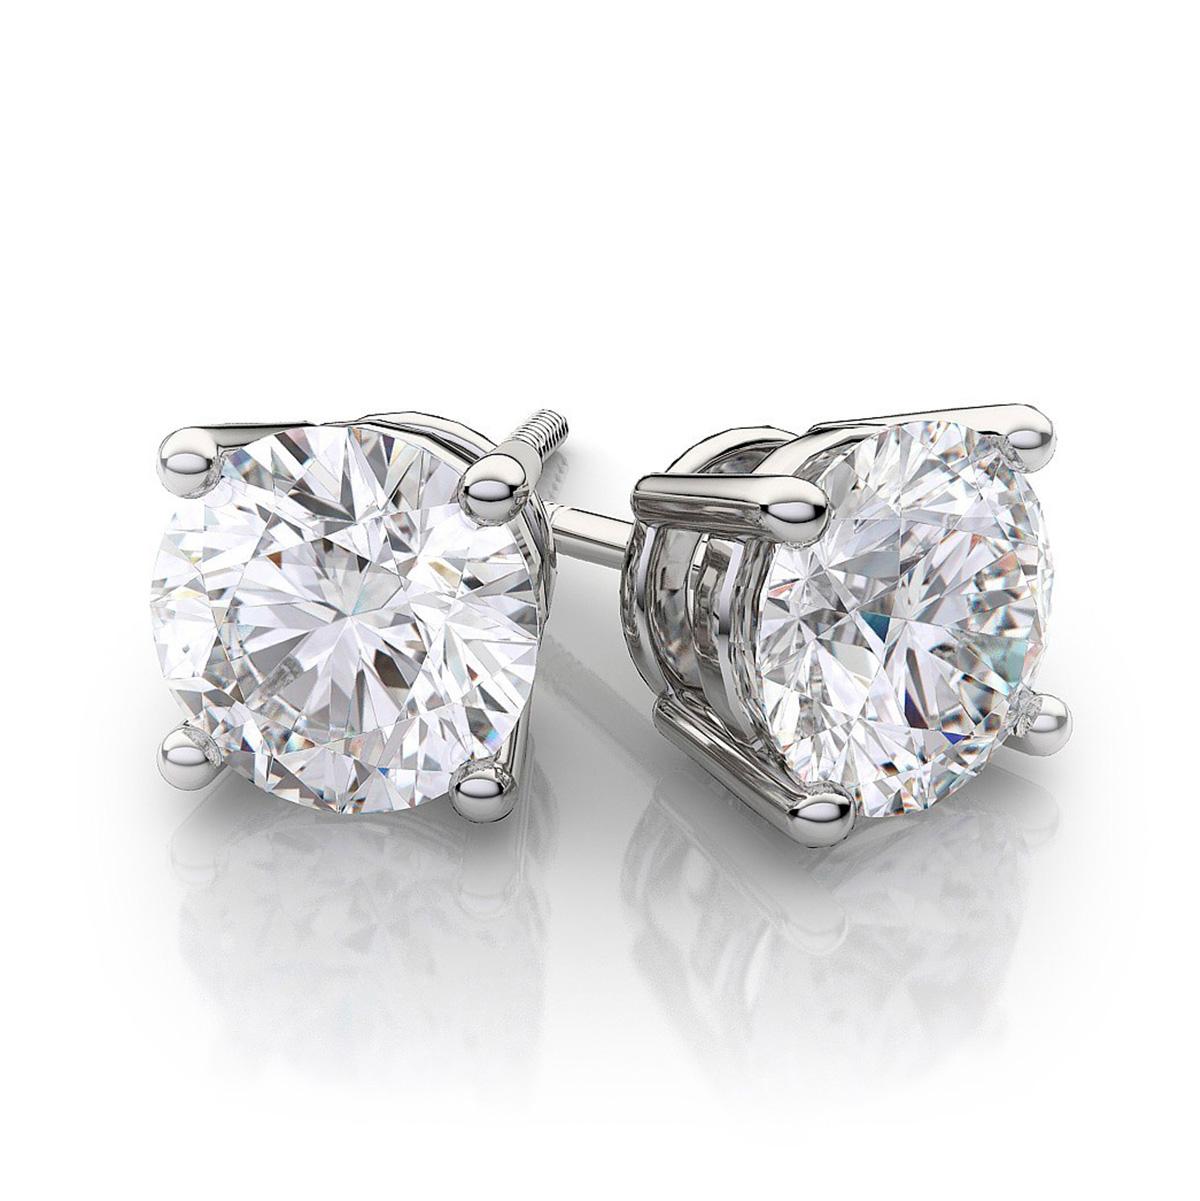 Diamond Solitaire Studs are a signature everyday piece of jewelry. They are a classic and a statement simultaneously. 

Diamonds Shape: Round 
Diamonds Weight: 1.01 ct + 1.00 ct 
Diamond Color: H
Diamond Clarity: VS2
1.01 - Excellent Cut, Polish &